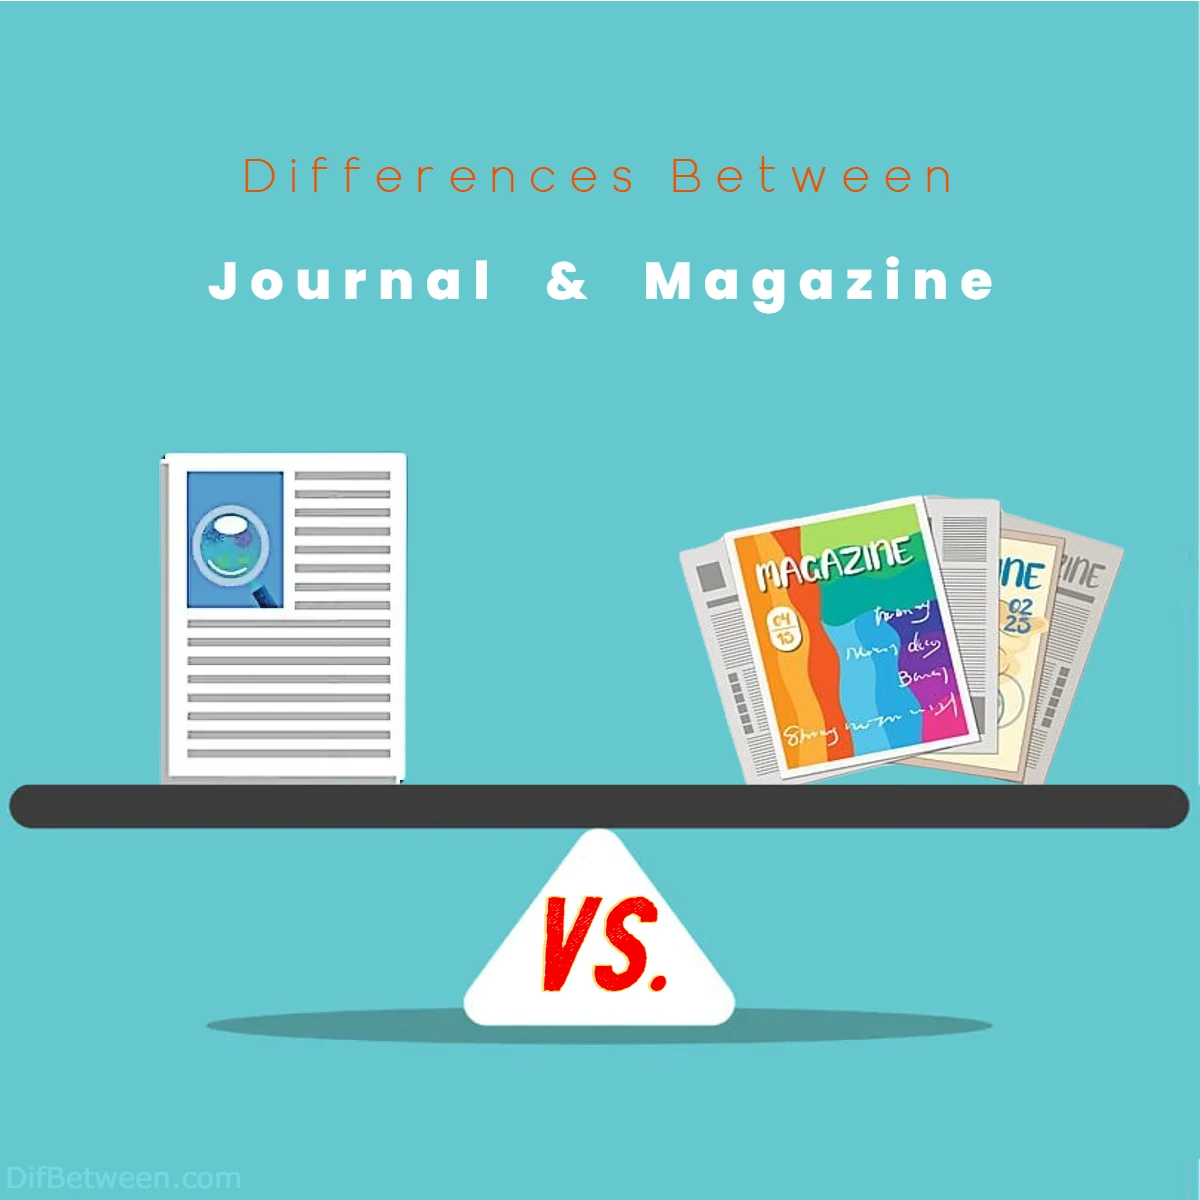 Differences Between Journal vs Magazine